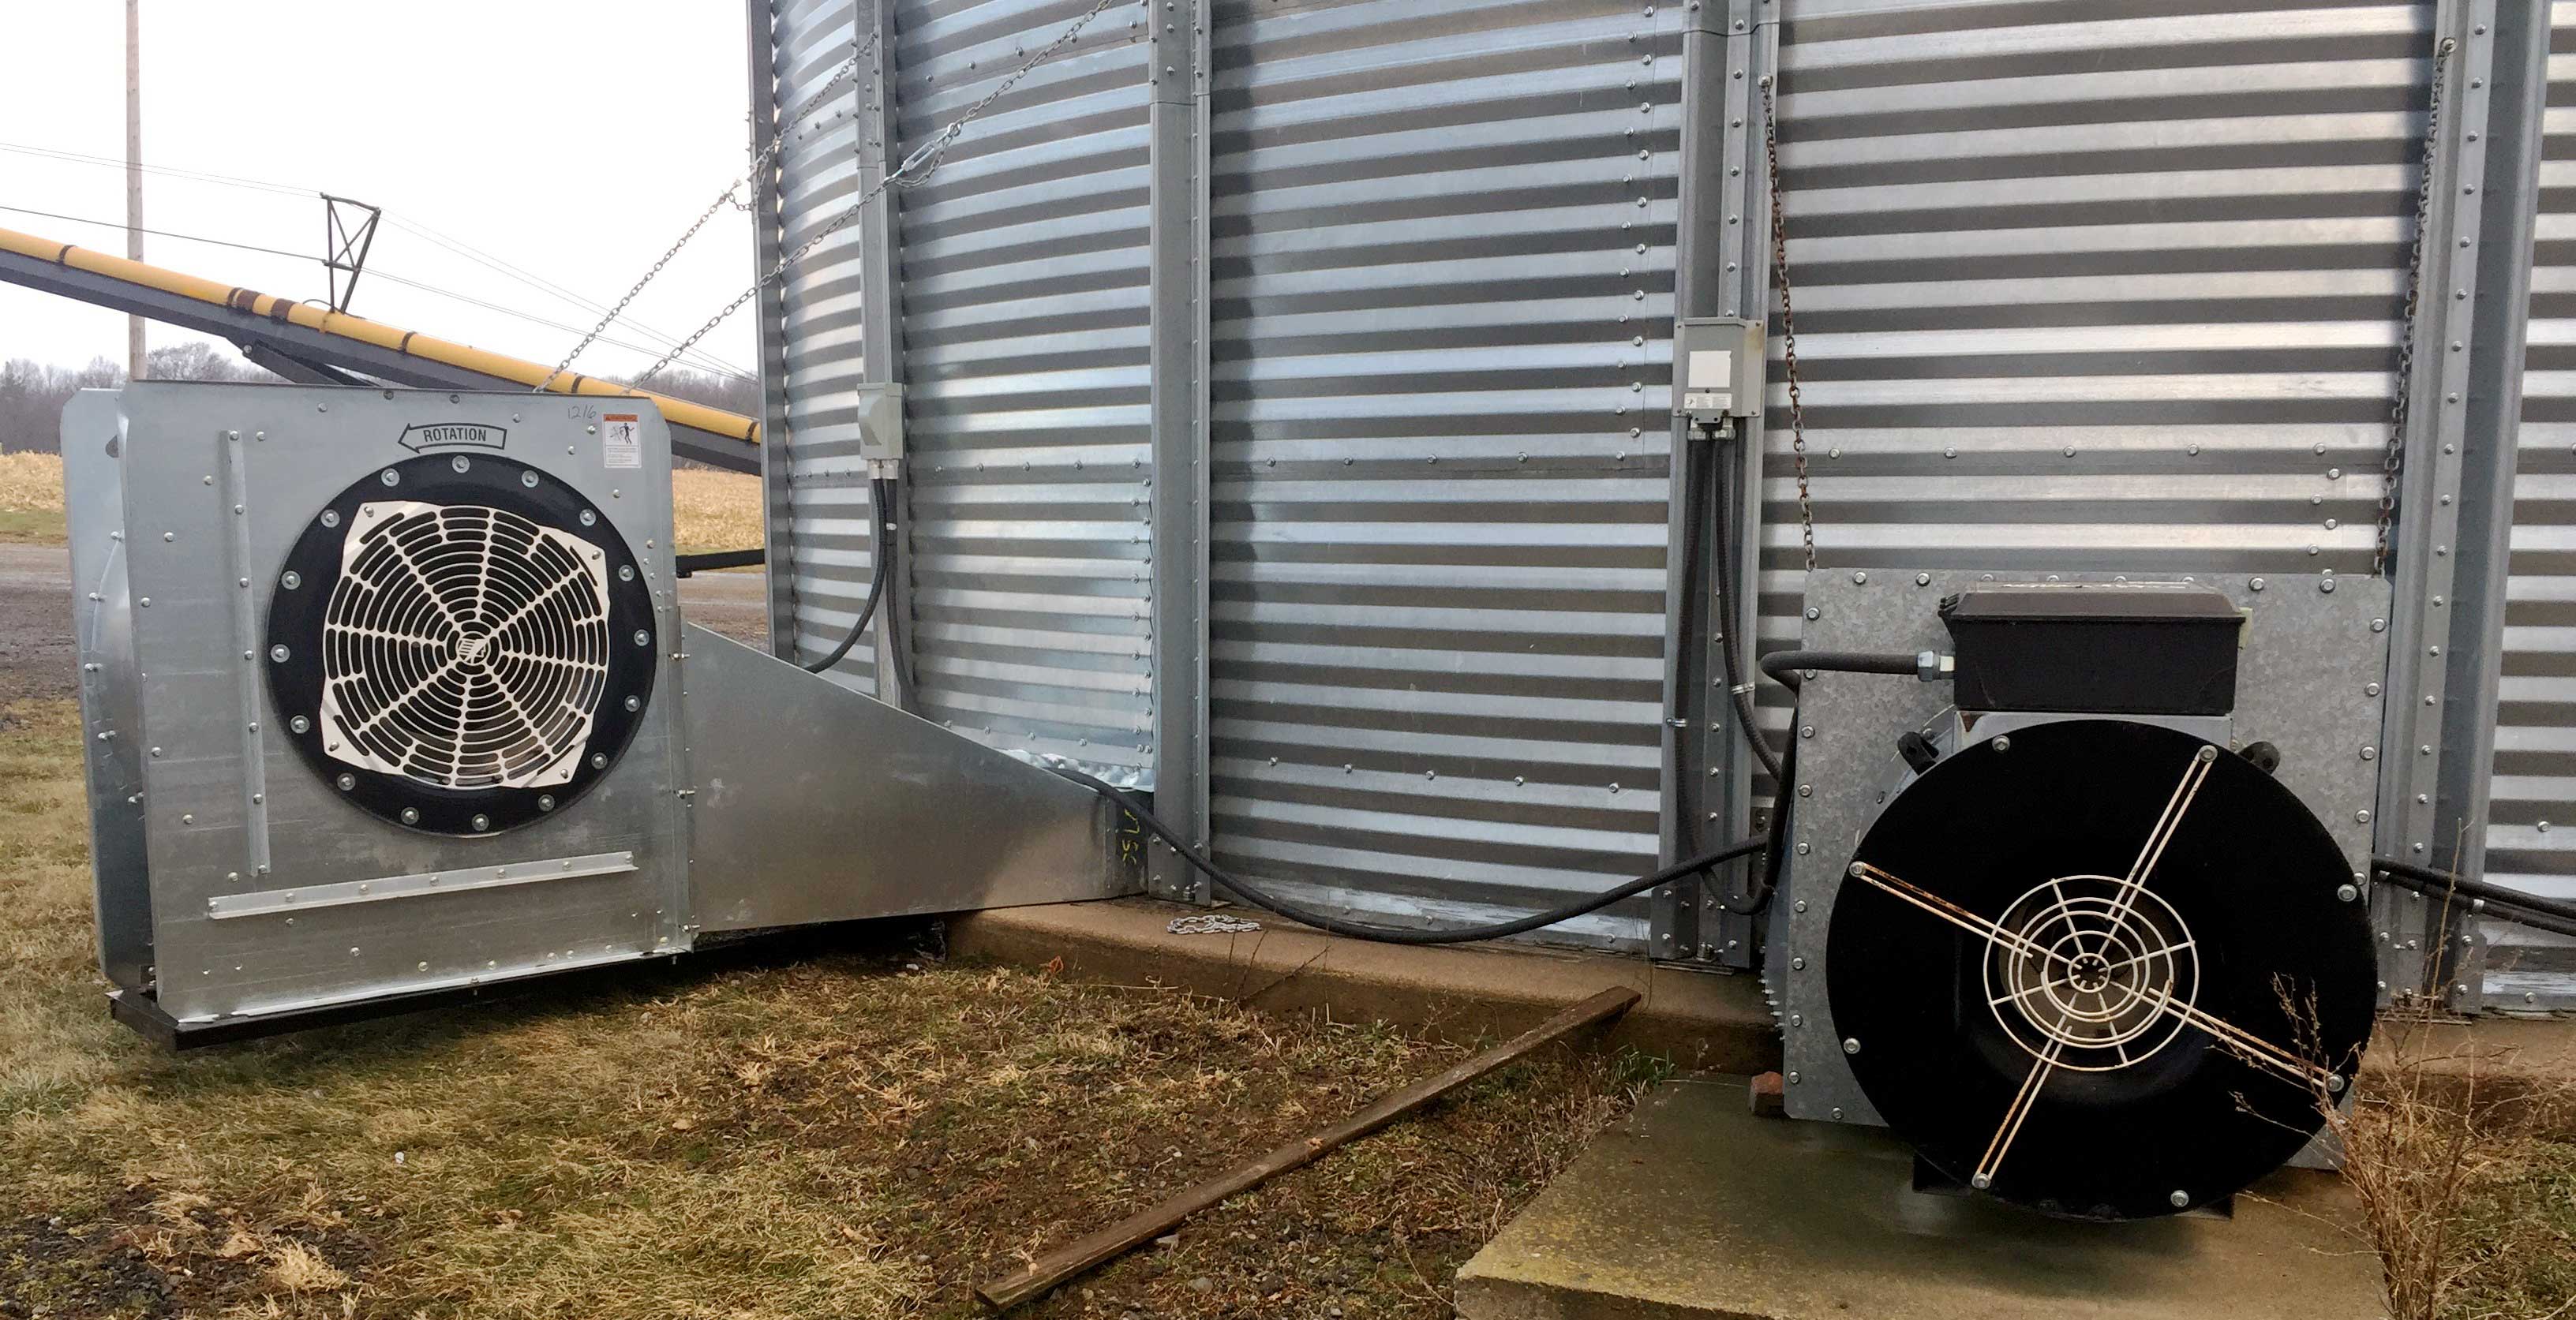 This photo shows a grain bin used for natural air drying. This bin has two fans installed to increase the airflow rate for faster drying.